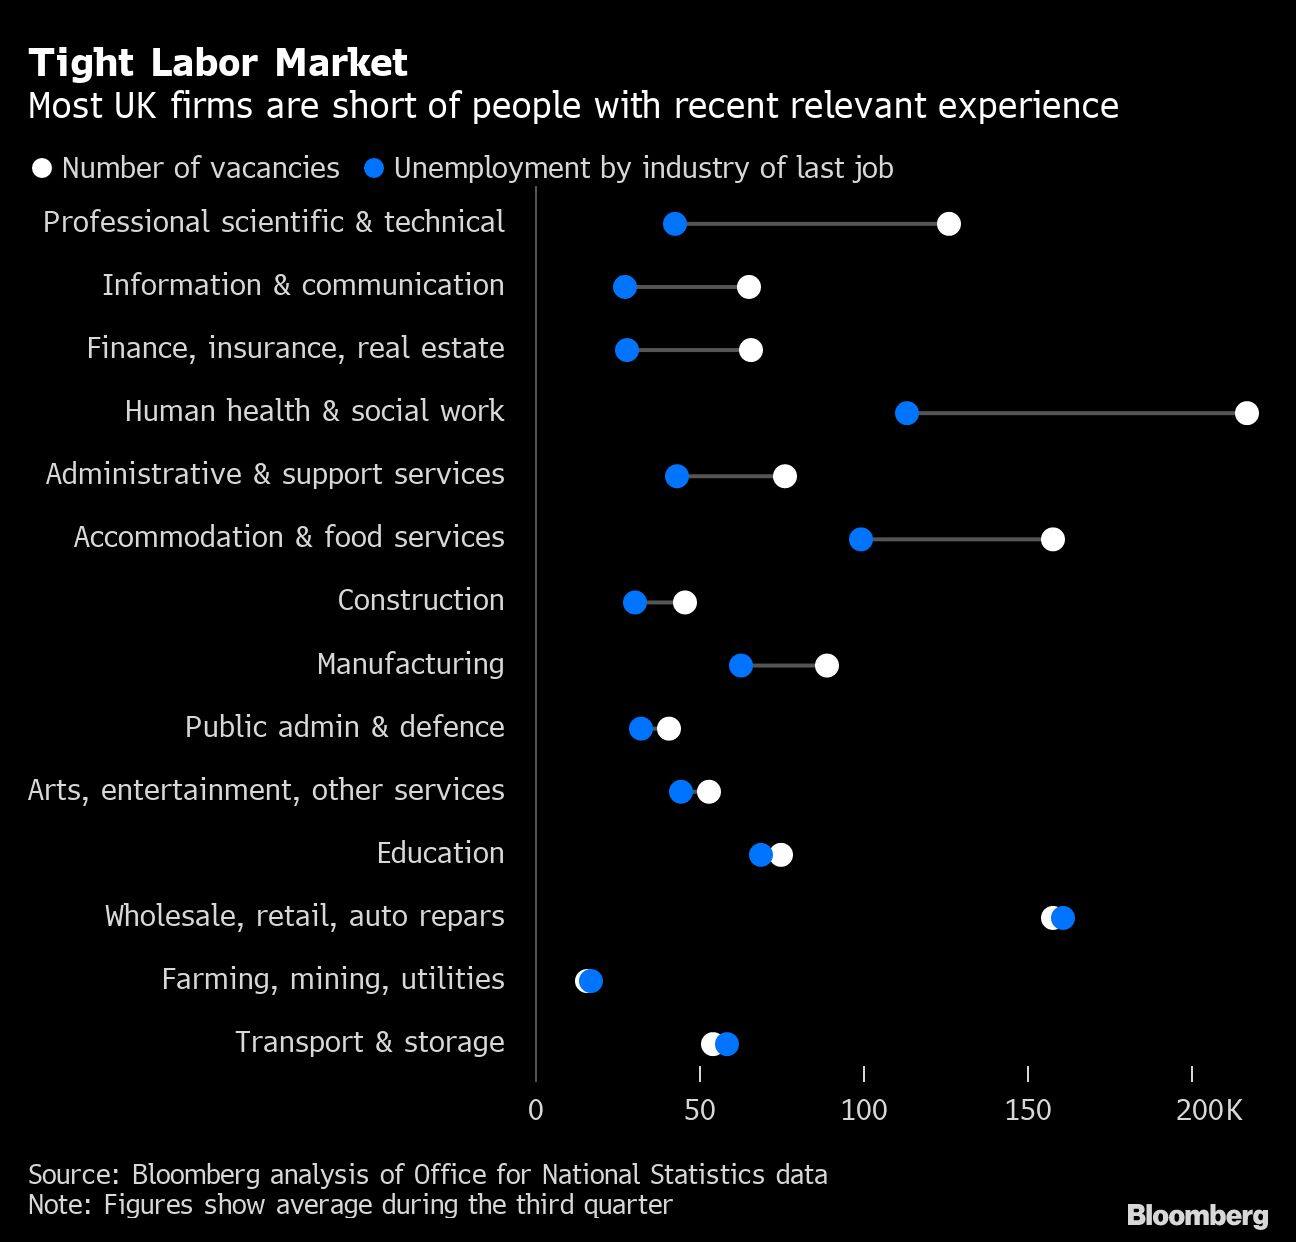 Tight Labor Market | Most UK firms are short of people with recent relevant experience